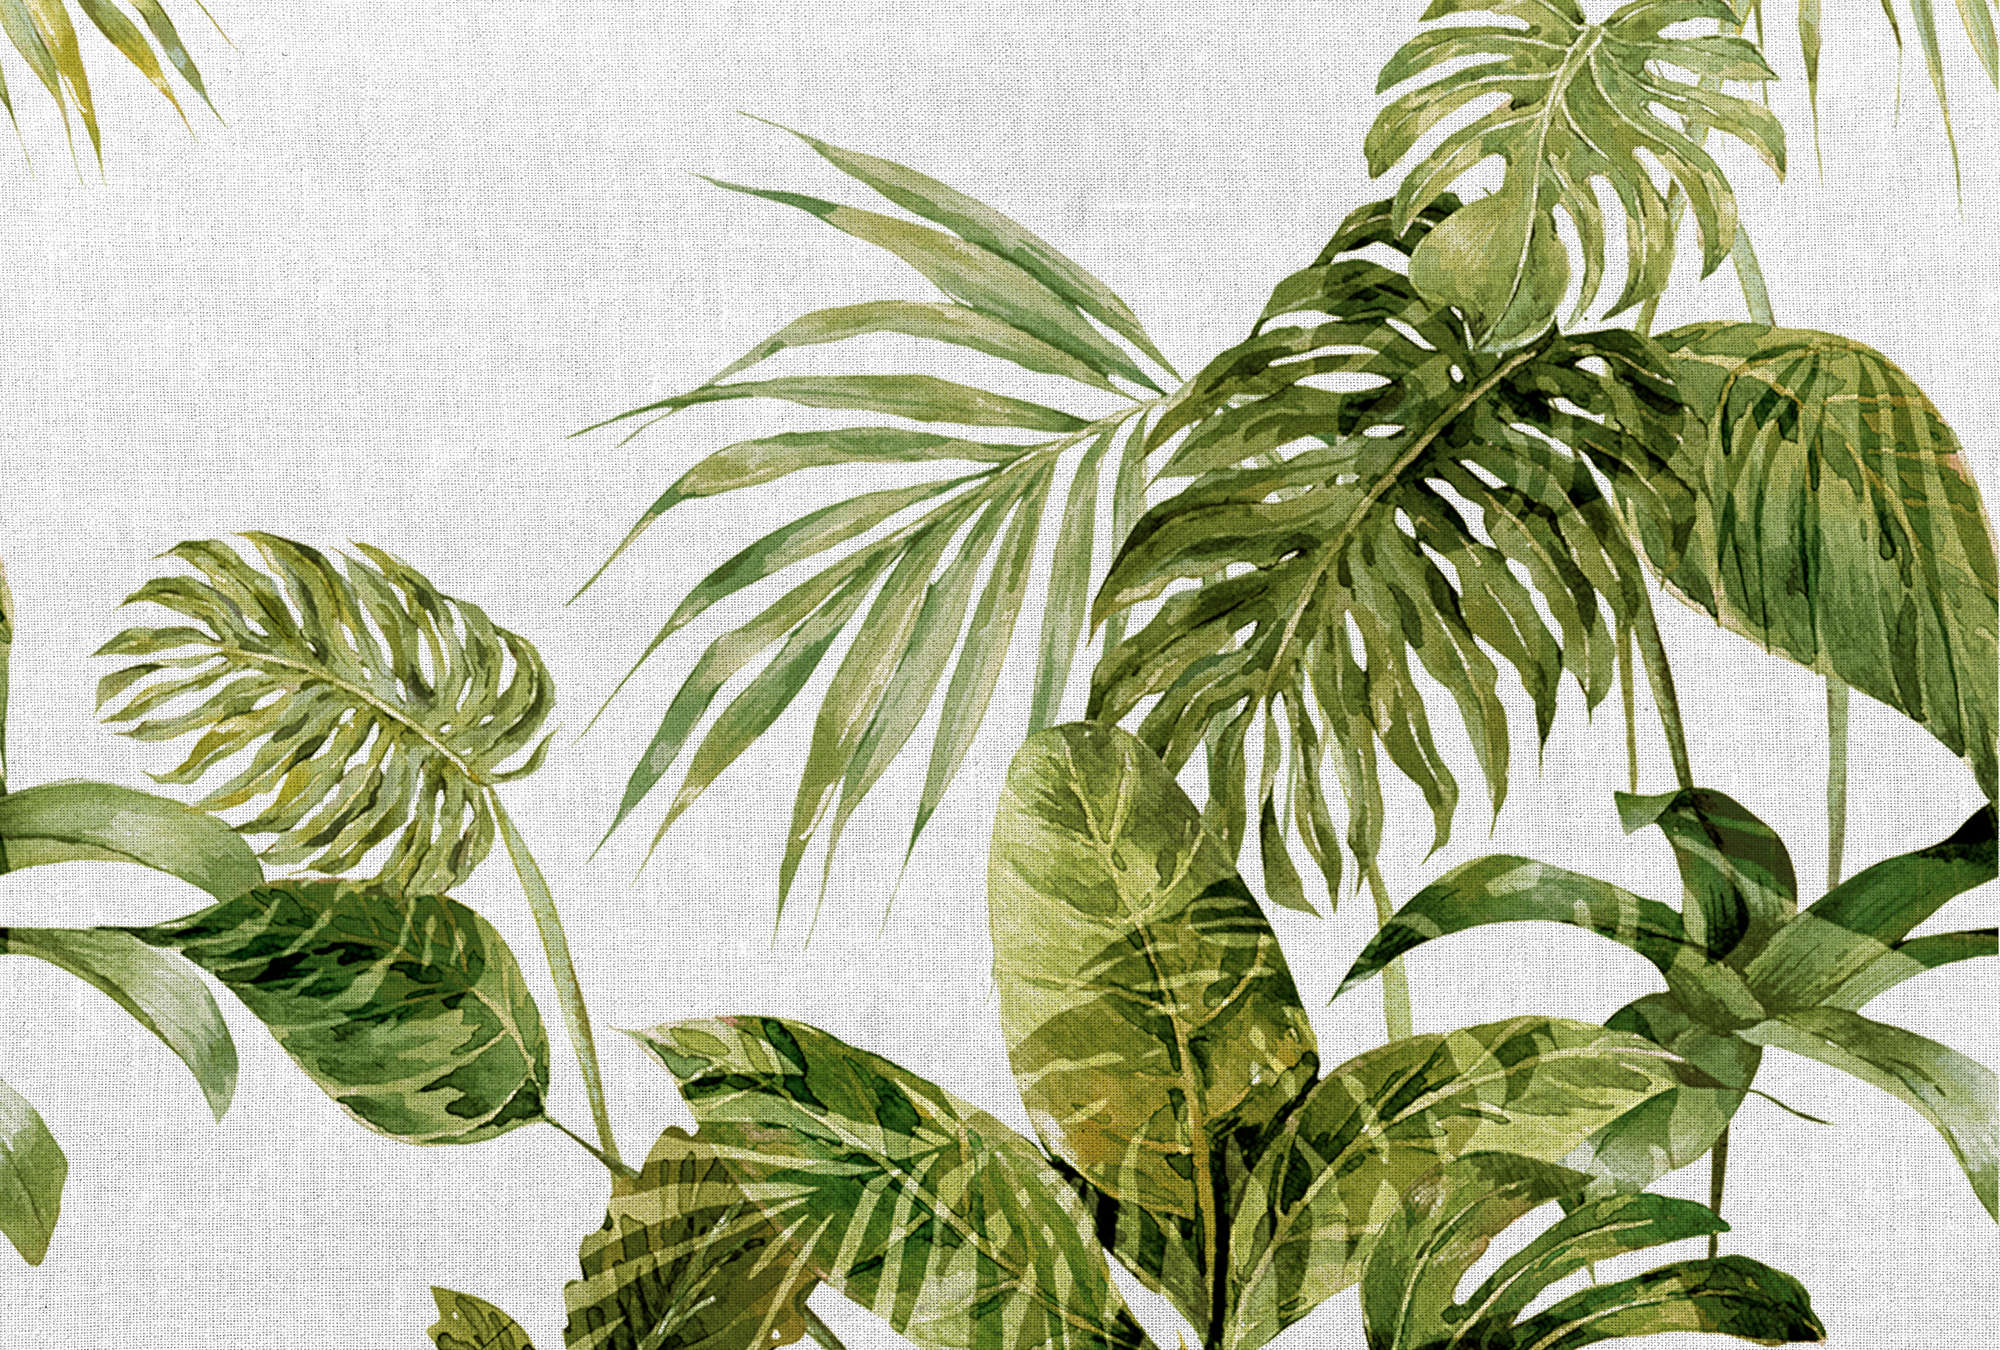             Tropical mural monstera leaves in watercolour style - green, grey
        